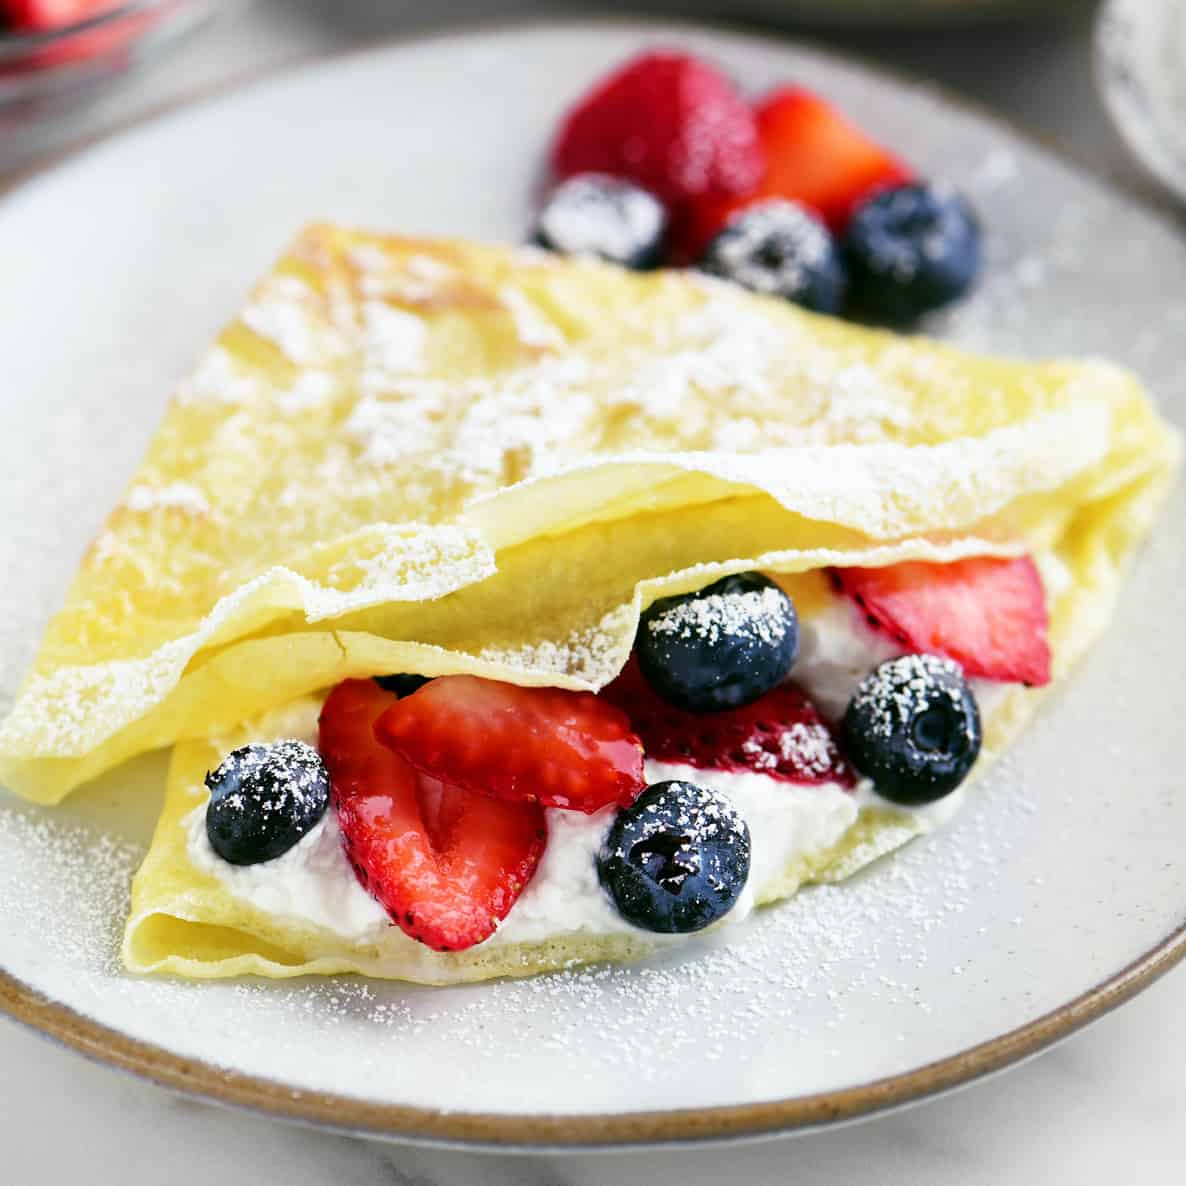 crepe filled with berries and whipped cream